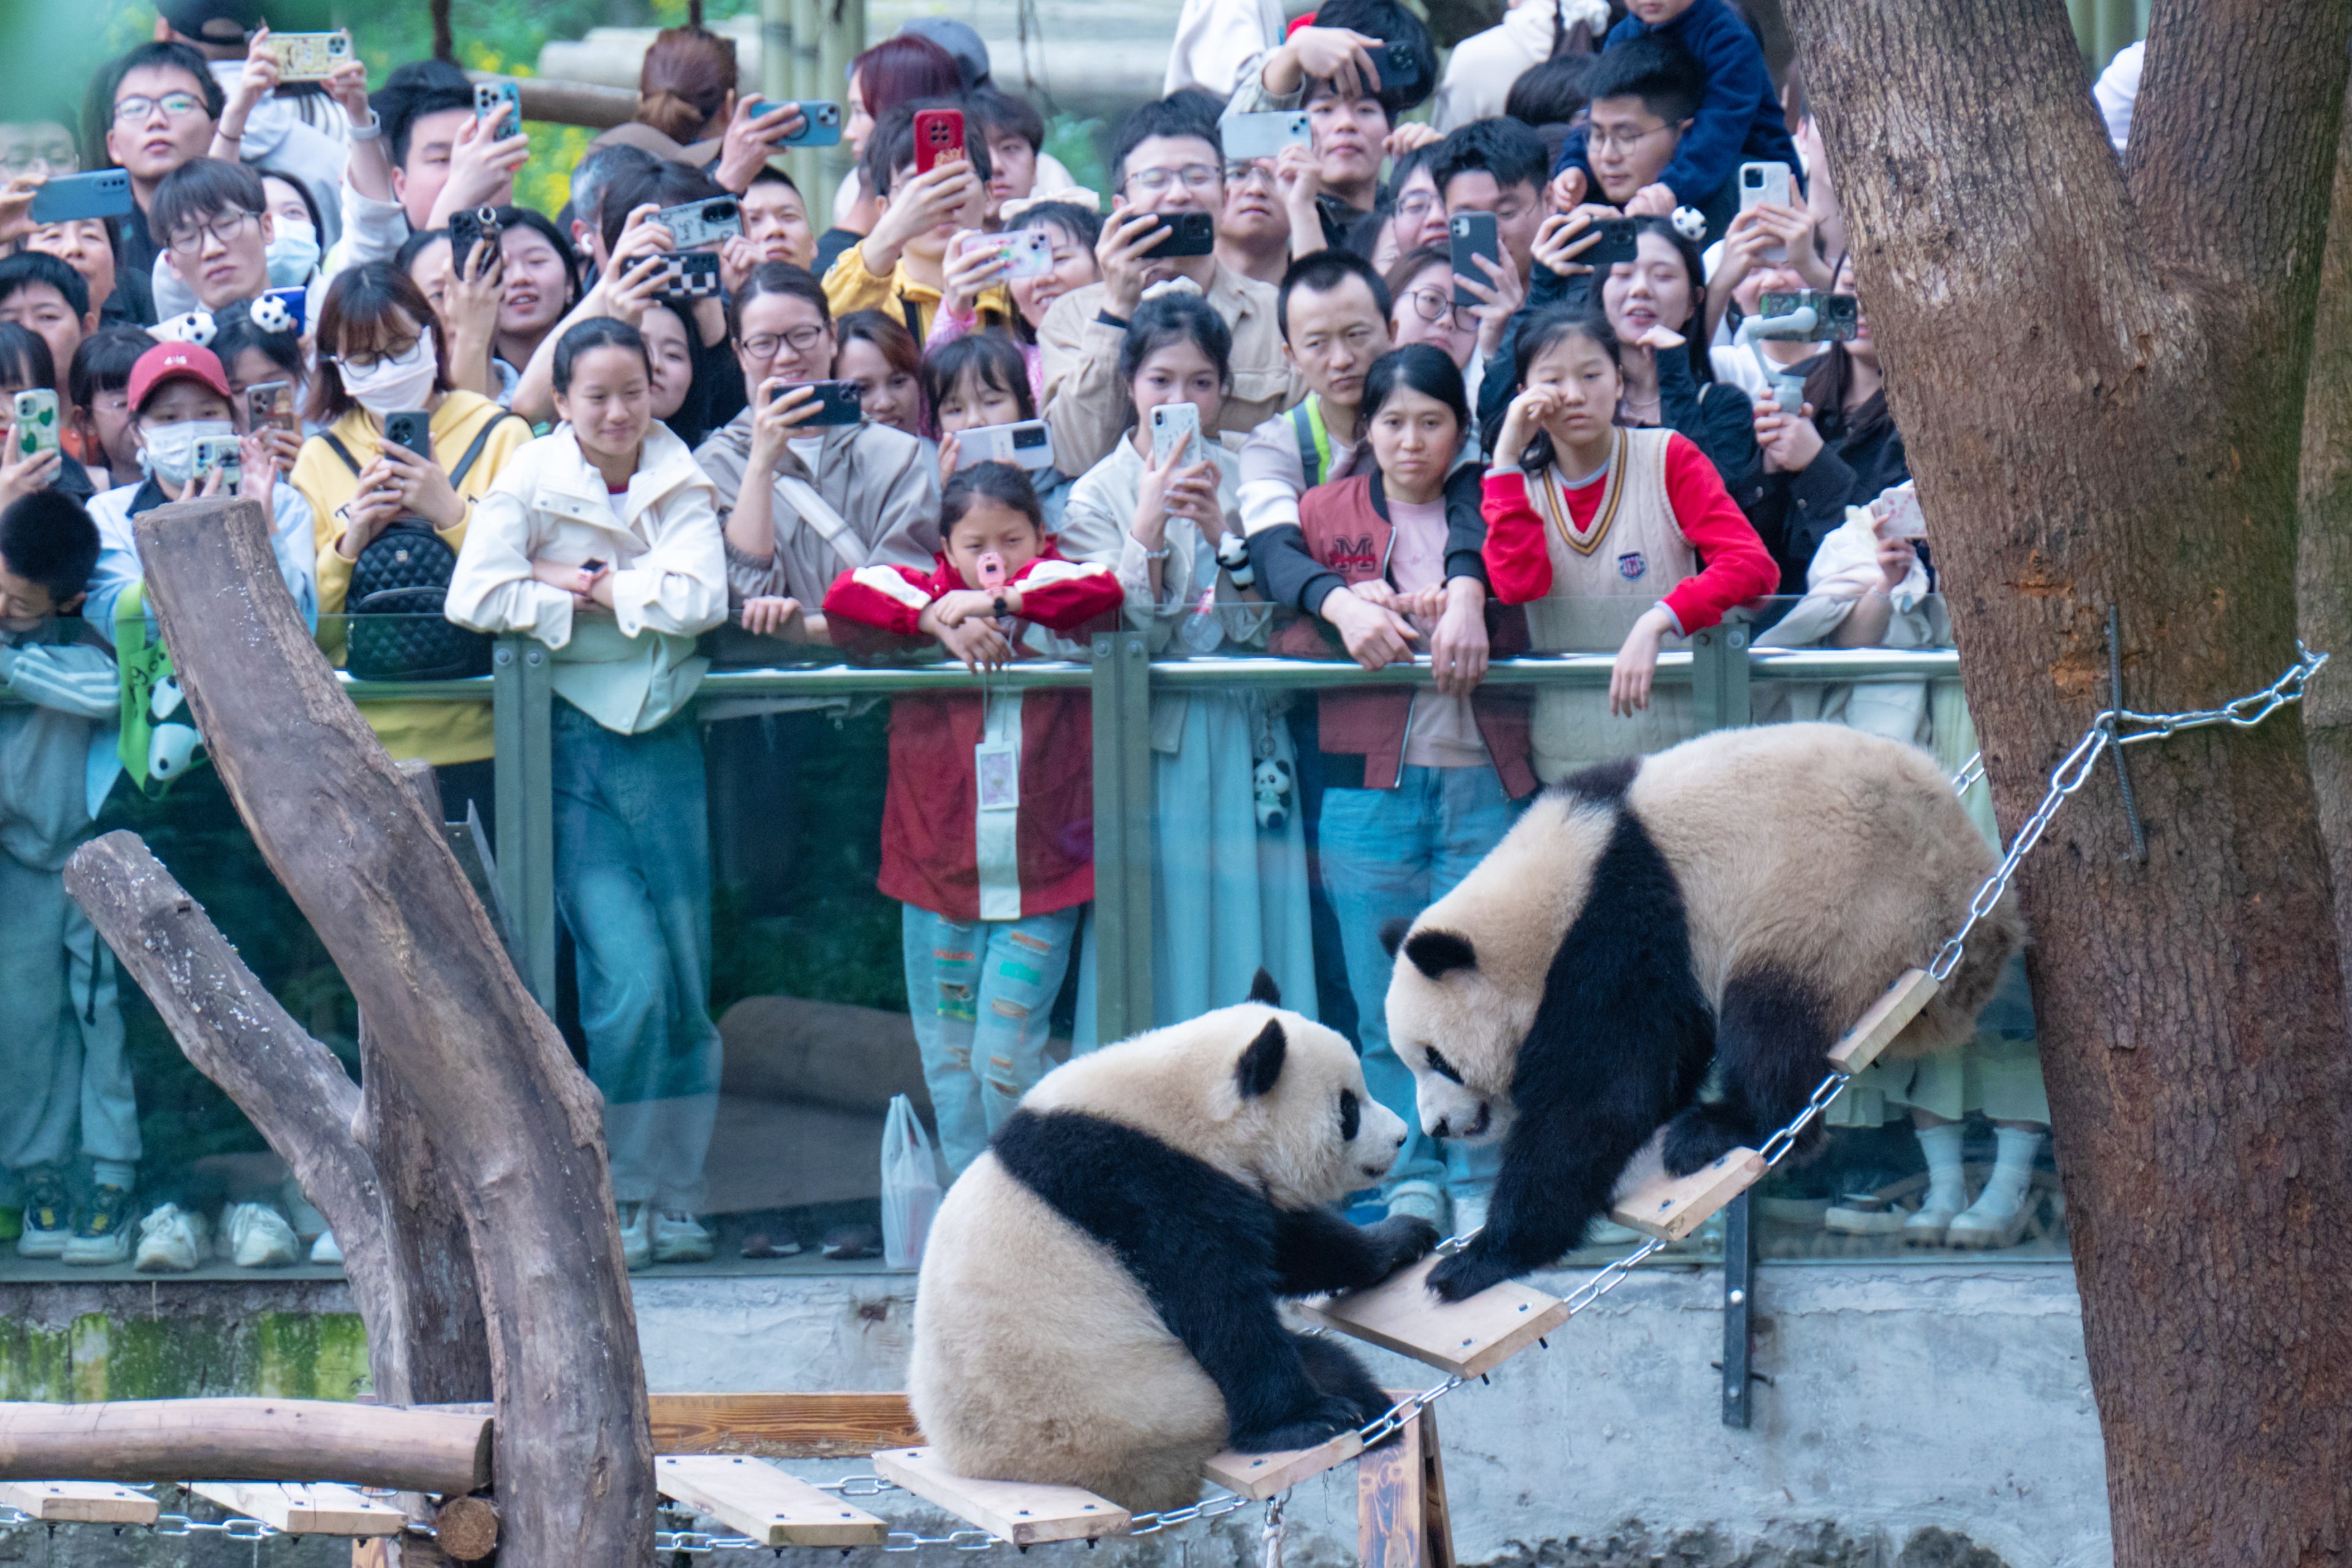 A crowd watches and takes pictures of two pandas on a wooden platform. One panda sits down while the other climbs up a ladder.